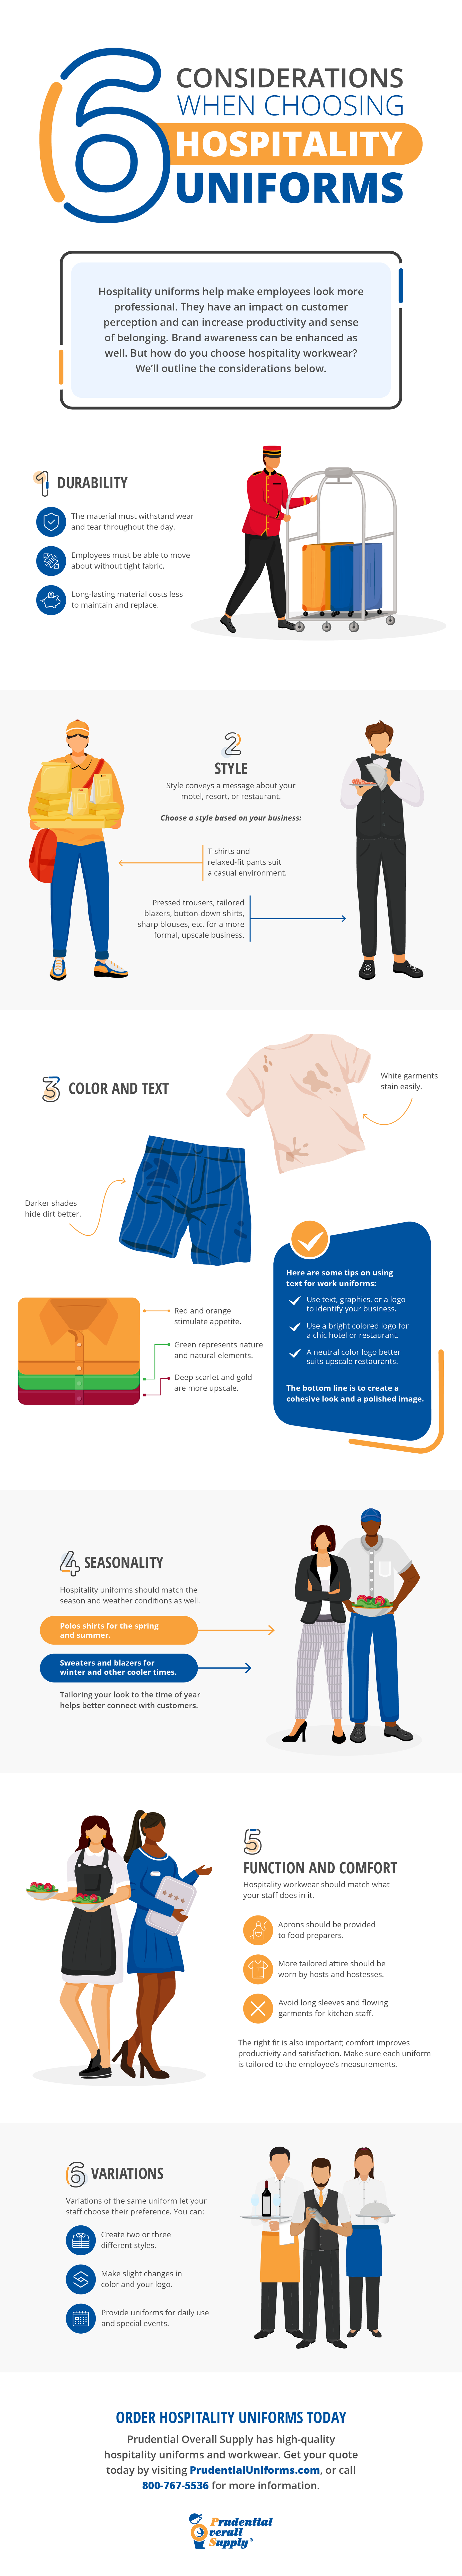 Considerations When Choosing Hospitality Uniforms Infographic